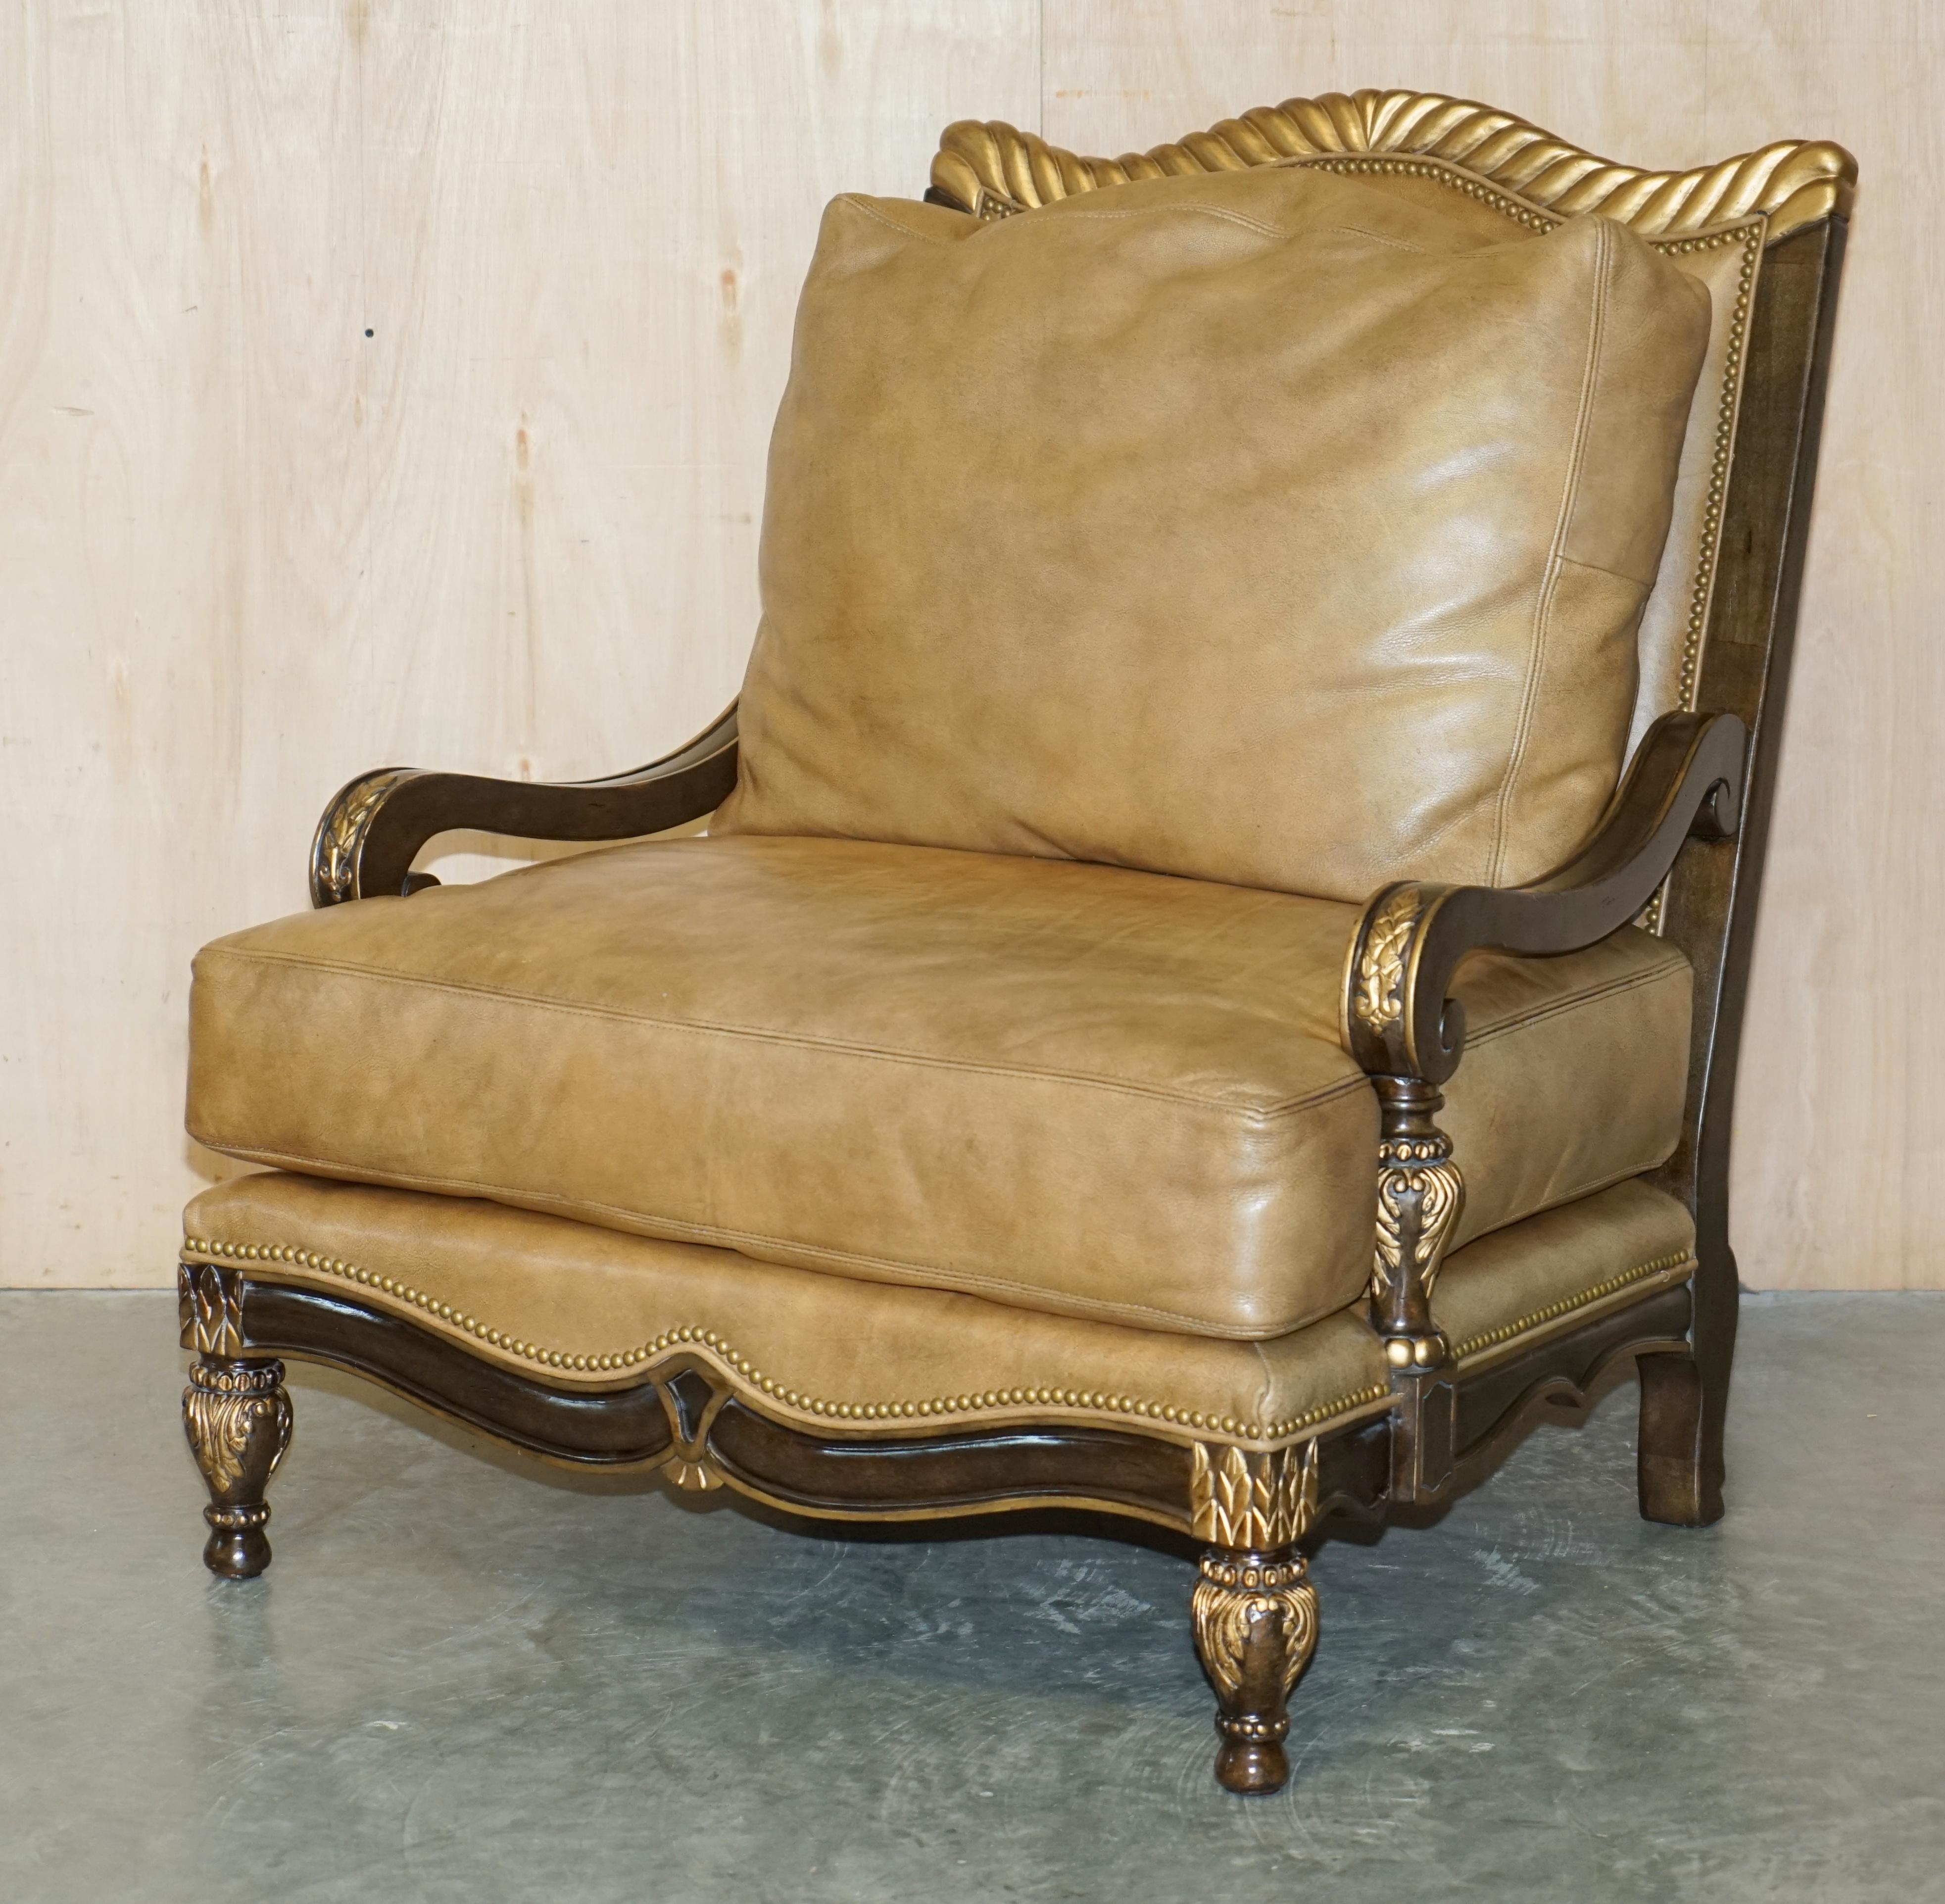 We are delighted to offer for sale this very large, hand made, Italian giltwood, tan brown leather throne style armchair with oversized matching footstool 

A very good looking well-made and super comfortable armchair and footstool, these are